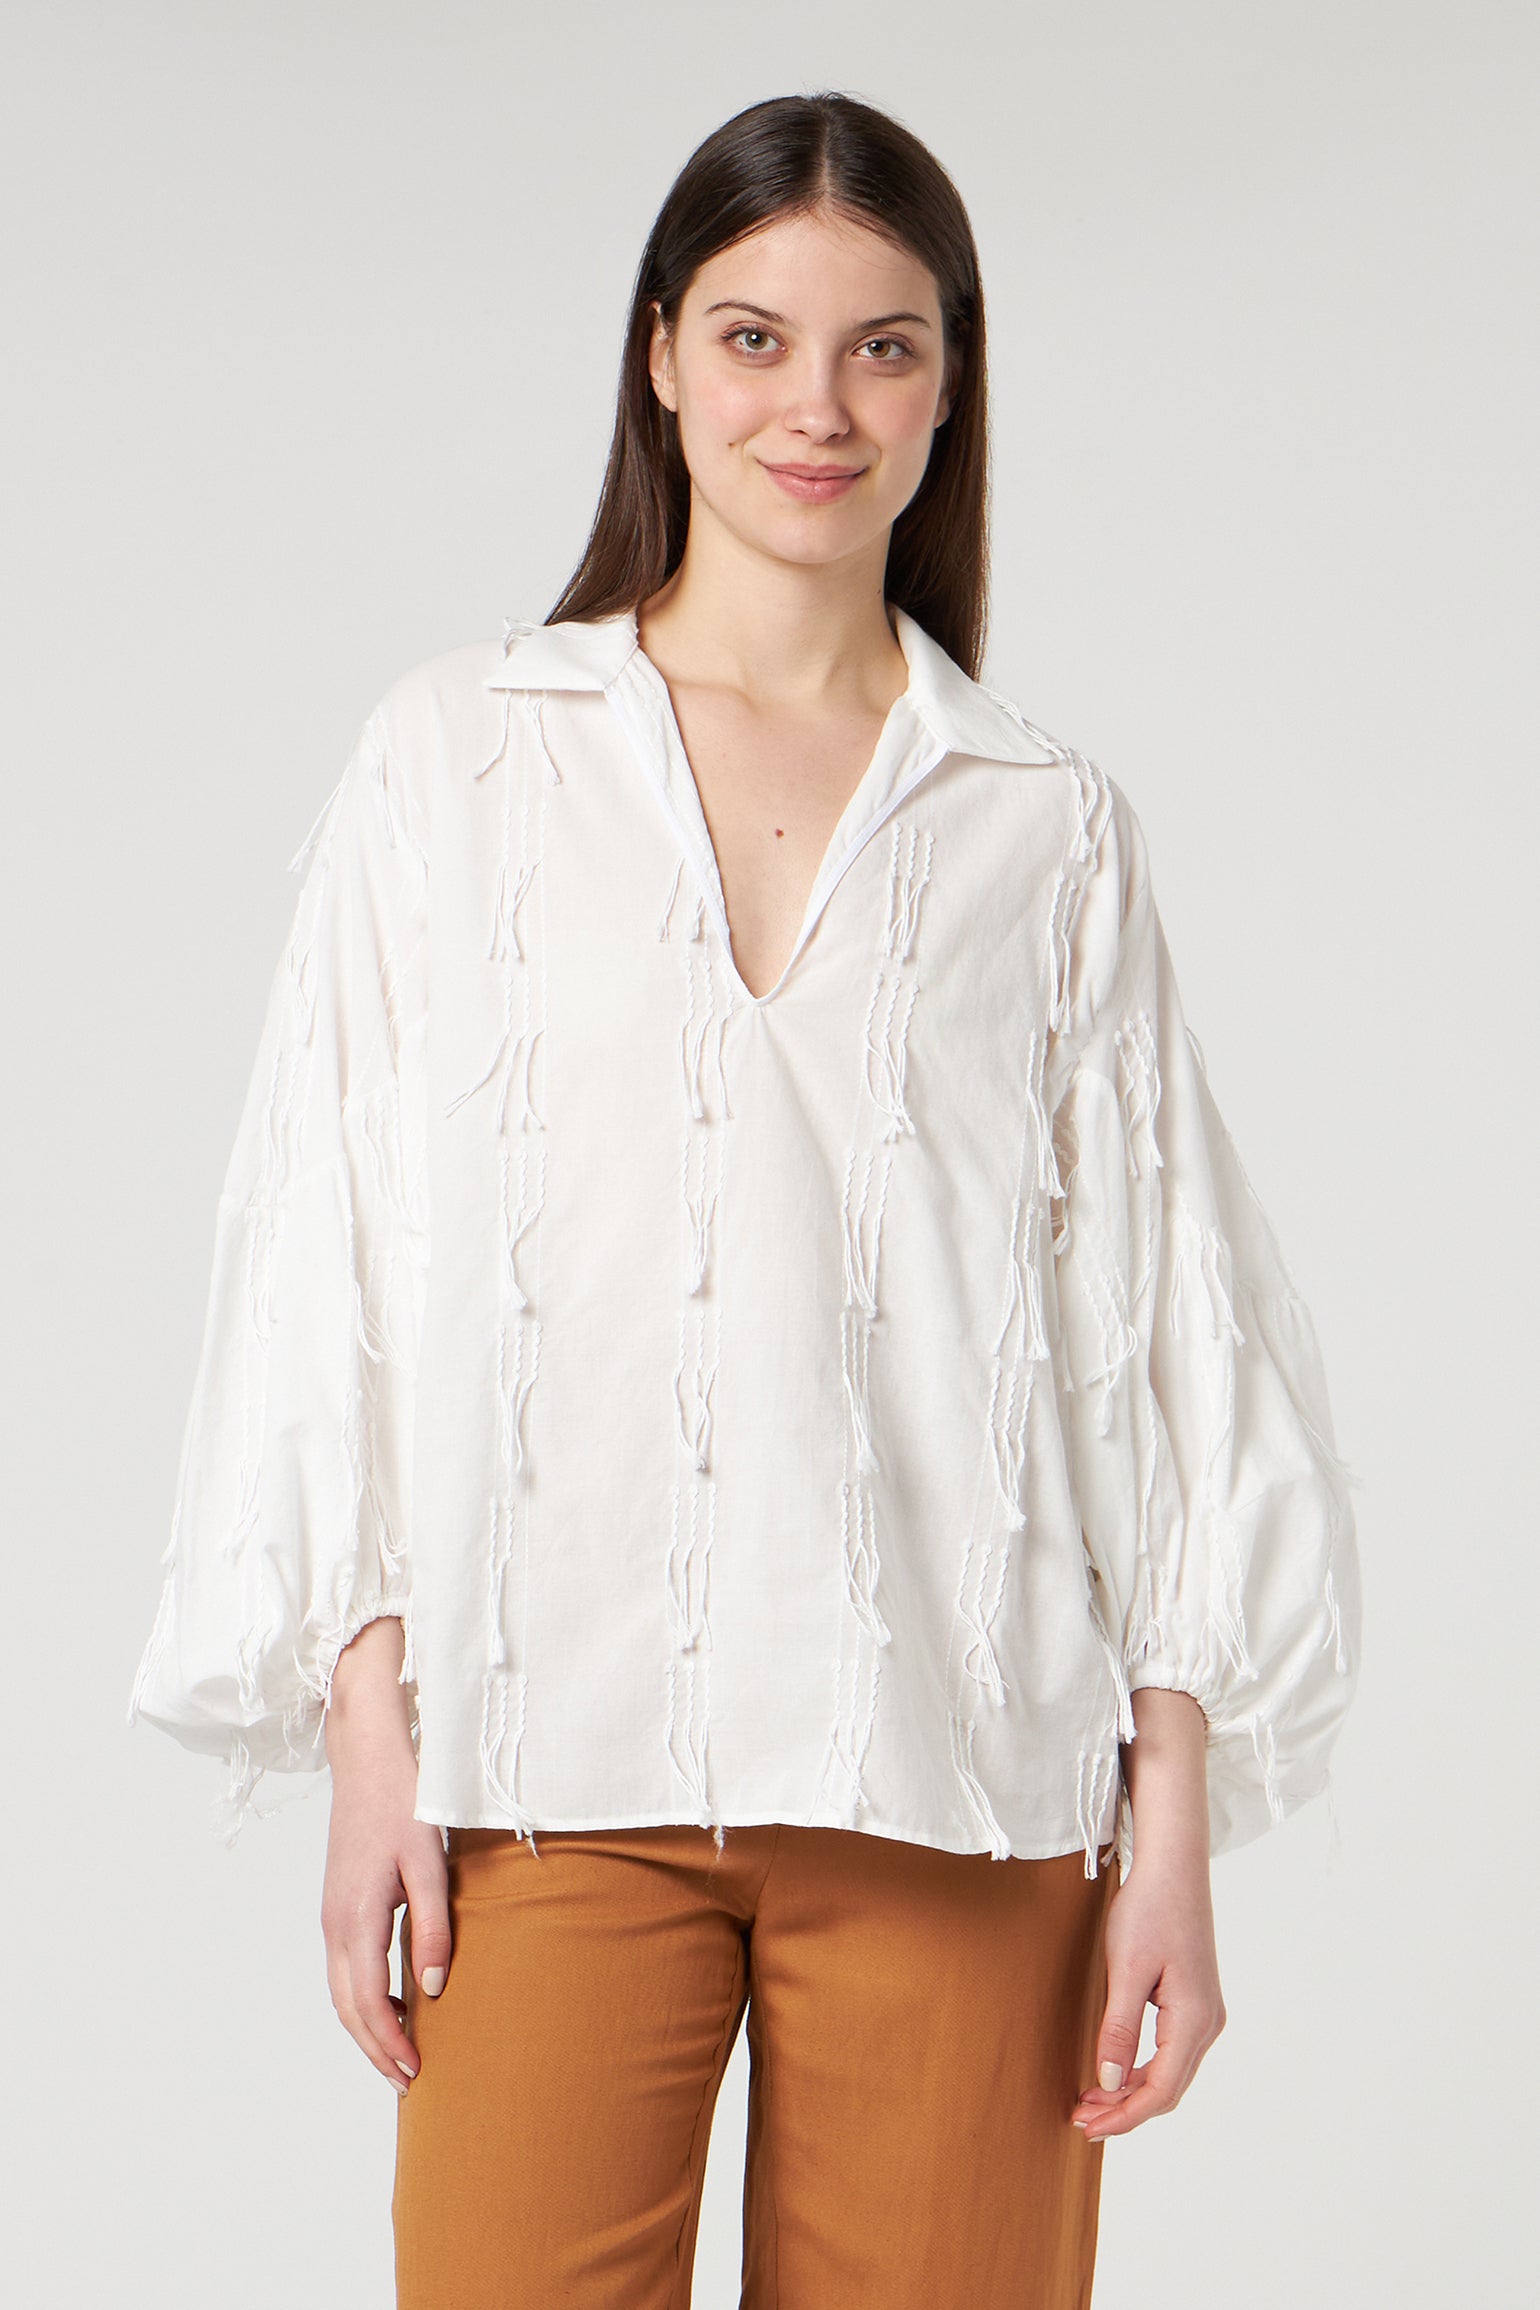 JIJIL White Blouse with Embroideries